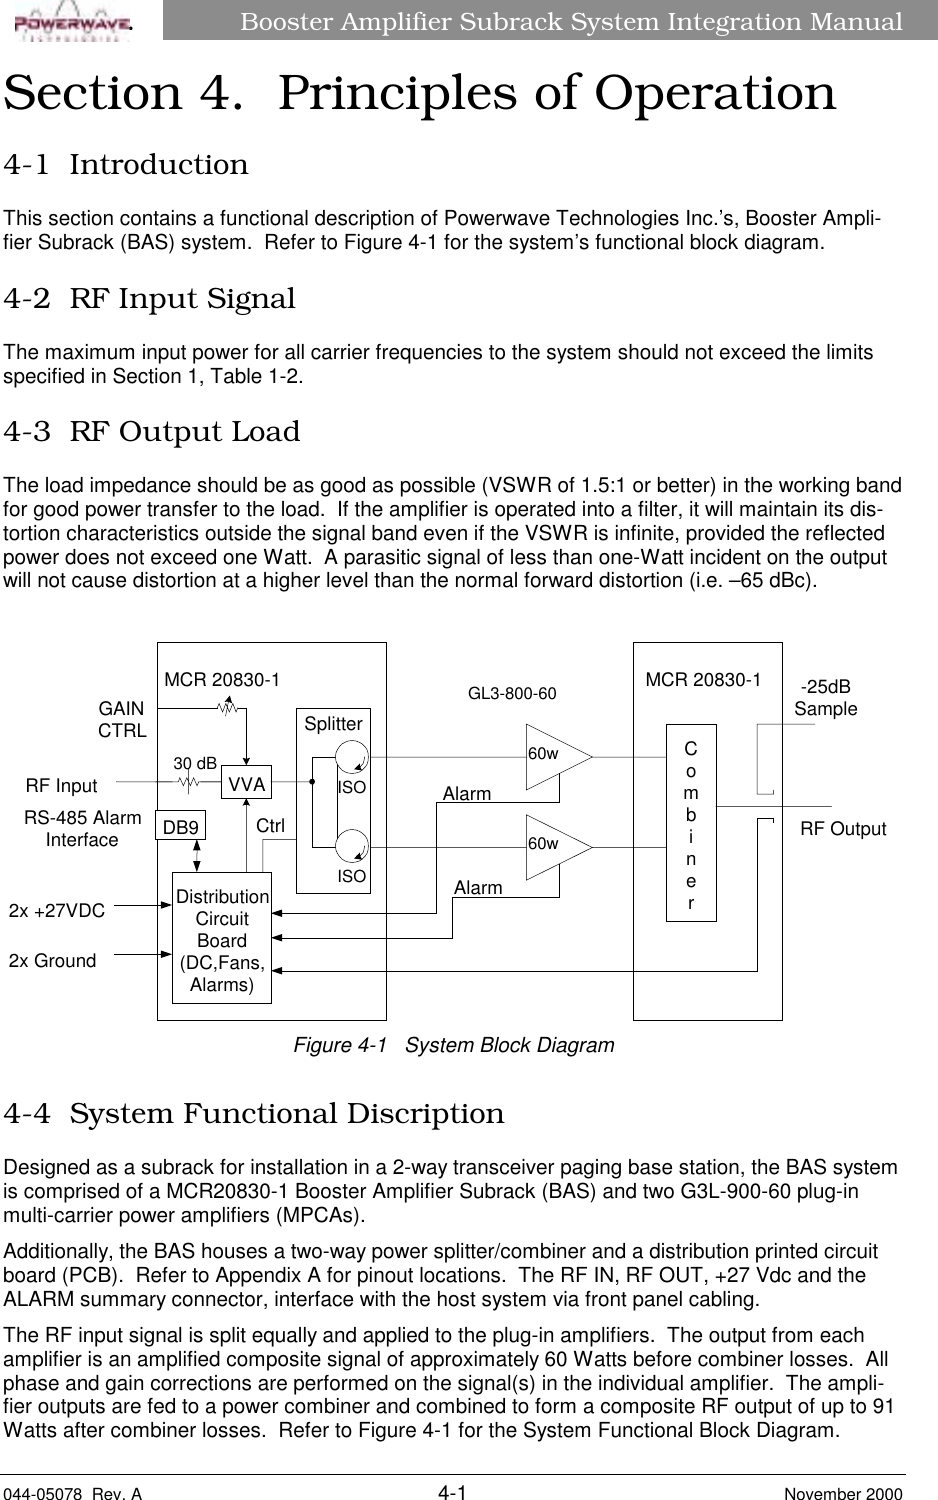 Booster Amplifier Subrack System Integration Manual044-05078  Rev. A 4-1 November 2000âSection 4.  Principles of Operation4-1  IntroductionThis section contains a functional description of Powerwave Technologies Inc.’s, Booster Ampli-fier Subrack (BAS) system.  Refer to Figure 4-1 for the system’s functional block diagram.4-2  RF Input SignalThe maximum input power for all carrier frequencies to the system should not exceed the limitsspecified in Section 1, Table 1-2.4-3  RF Output LoadThe load impedance should be as good as possible (VSWR of 1.5:1 or better) in the working bandfor good power transfer to the load.  If the amplifier is operated into a filter, it will maintain its dis-tortion characteristics outside the signal band even if the VSWR is infinite, provided the reflectedpower does not exceed one Watt.  A parasitic signal of less than one-Watt incident on the outputwill not cause distortion at a higher level than the normal forward distortion (i.e. –65 dBc). MCR 20830-1  MCR 20830-160w60wRS-485 AlarmInterfaceVVACombinerGAINCTRL SplitterDistributionCircuitBoard(DC,Fans,Alarms)ISOISO-25dBSampleDB9AlarmAlarmCtrl2x +27VDC2x GroundRF InputRF OutputGL3-800-6030 dBFigure 4-1   System Block Diagram4-4  System Functional DiscriptionDesigned as a subrack for installation in a 2-way transceiver paging base station, the BAS systemis comprised of a MCR20830-1 Booster Amplifier Subrack (BAS) and two G3L-900-60 plug-inmulti-carrier power amplifiers (MPCAs).Additionally, the BAS houses a two-way power splitter/combiner and a distribution printed circuitboard (PCB).  Refer to Appendix A for pinout locations.  The RF IN, RF OUT, +27 Vdc and theALARM summary connector, interface with the host system via front panel cabling.The RF input signal is split equally and applied to the plug-in amplifiers.  The output from eachamplifier is an amplified composite signal of approximately 60 Watts before combiner losses.  Allphase and gain corrections are performed on the signal(s) in the individual amplifier.  The ampli-fier outputs are fed to a power combiner and combined to form a composite RF output of up to 91Watts after combiner losses.  Refer to Figure 4-1 for the System Functional Block Diagram.